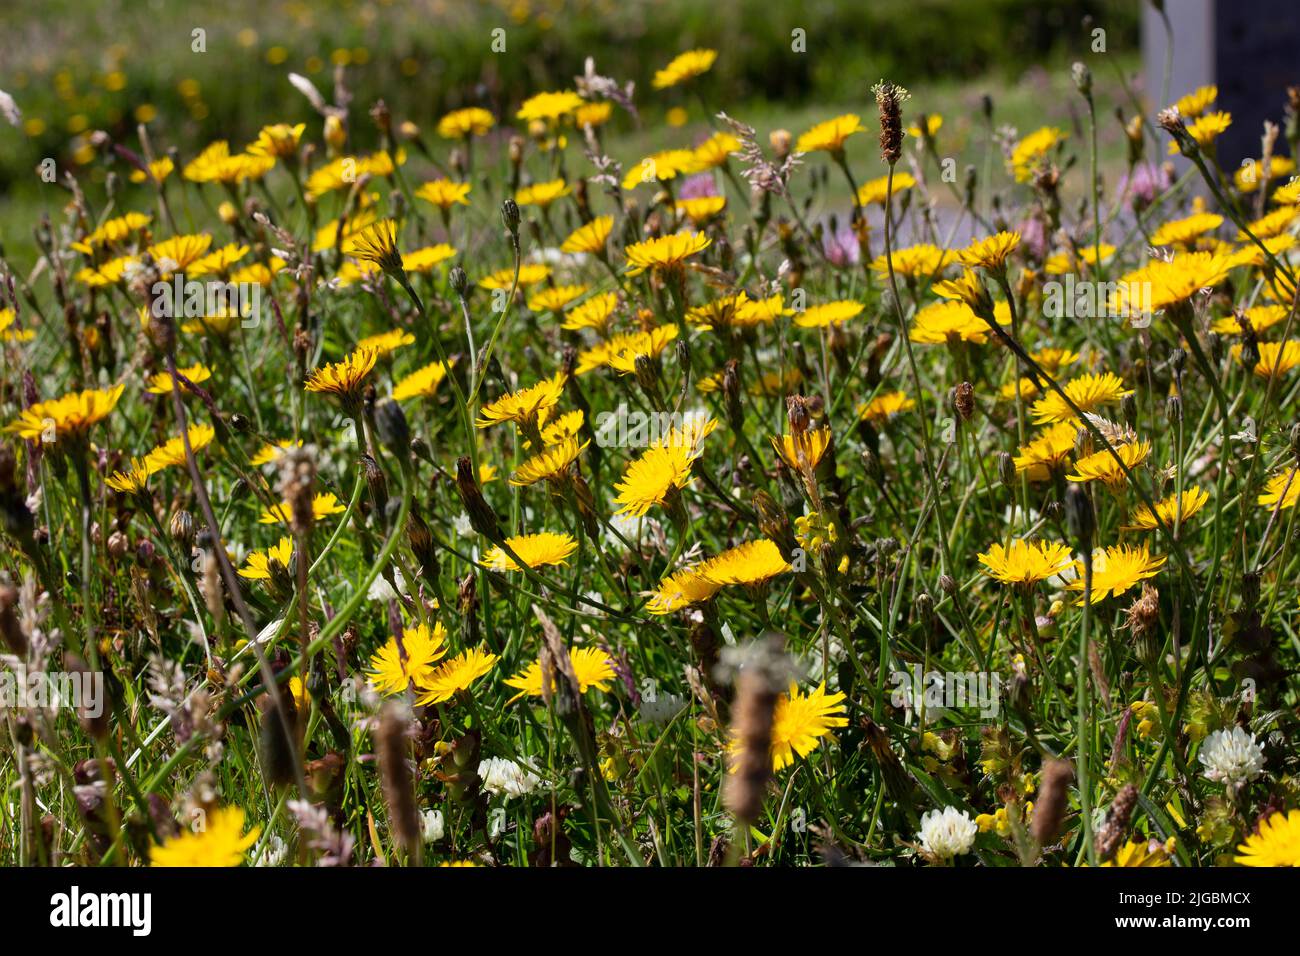 Dandelions in a Hecke, County Kerry, Irland Stockfoto